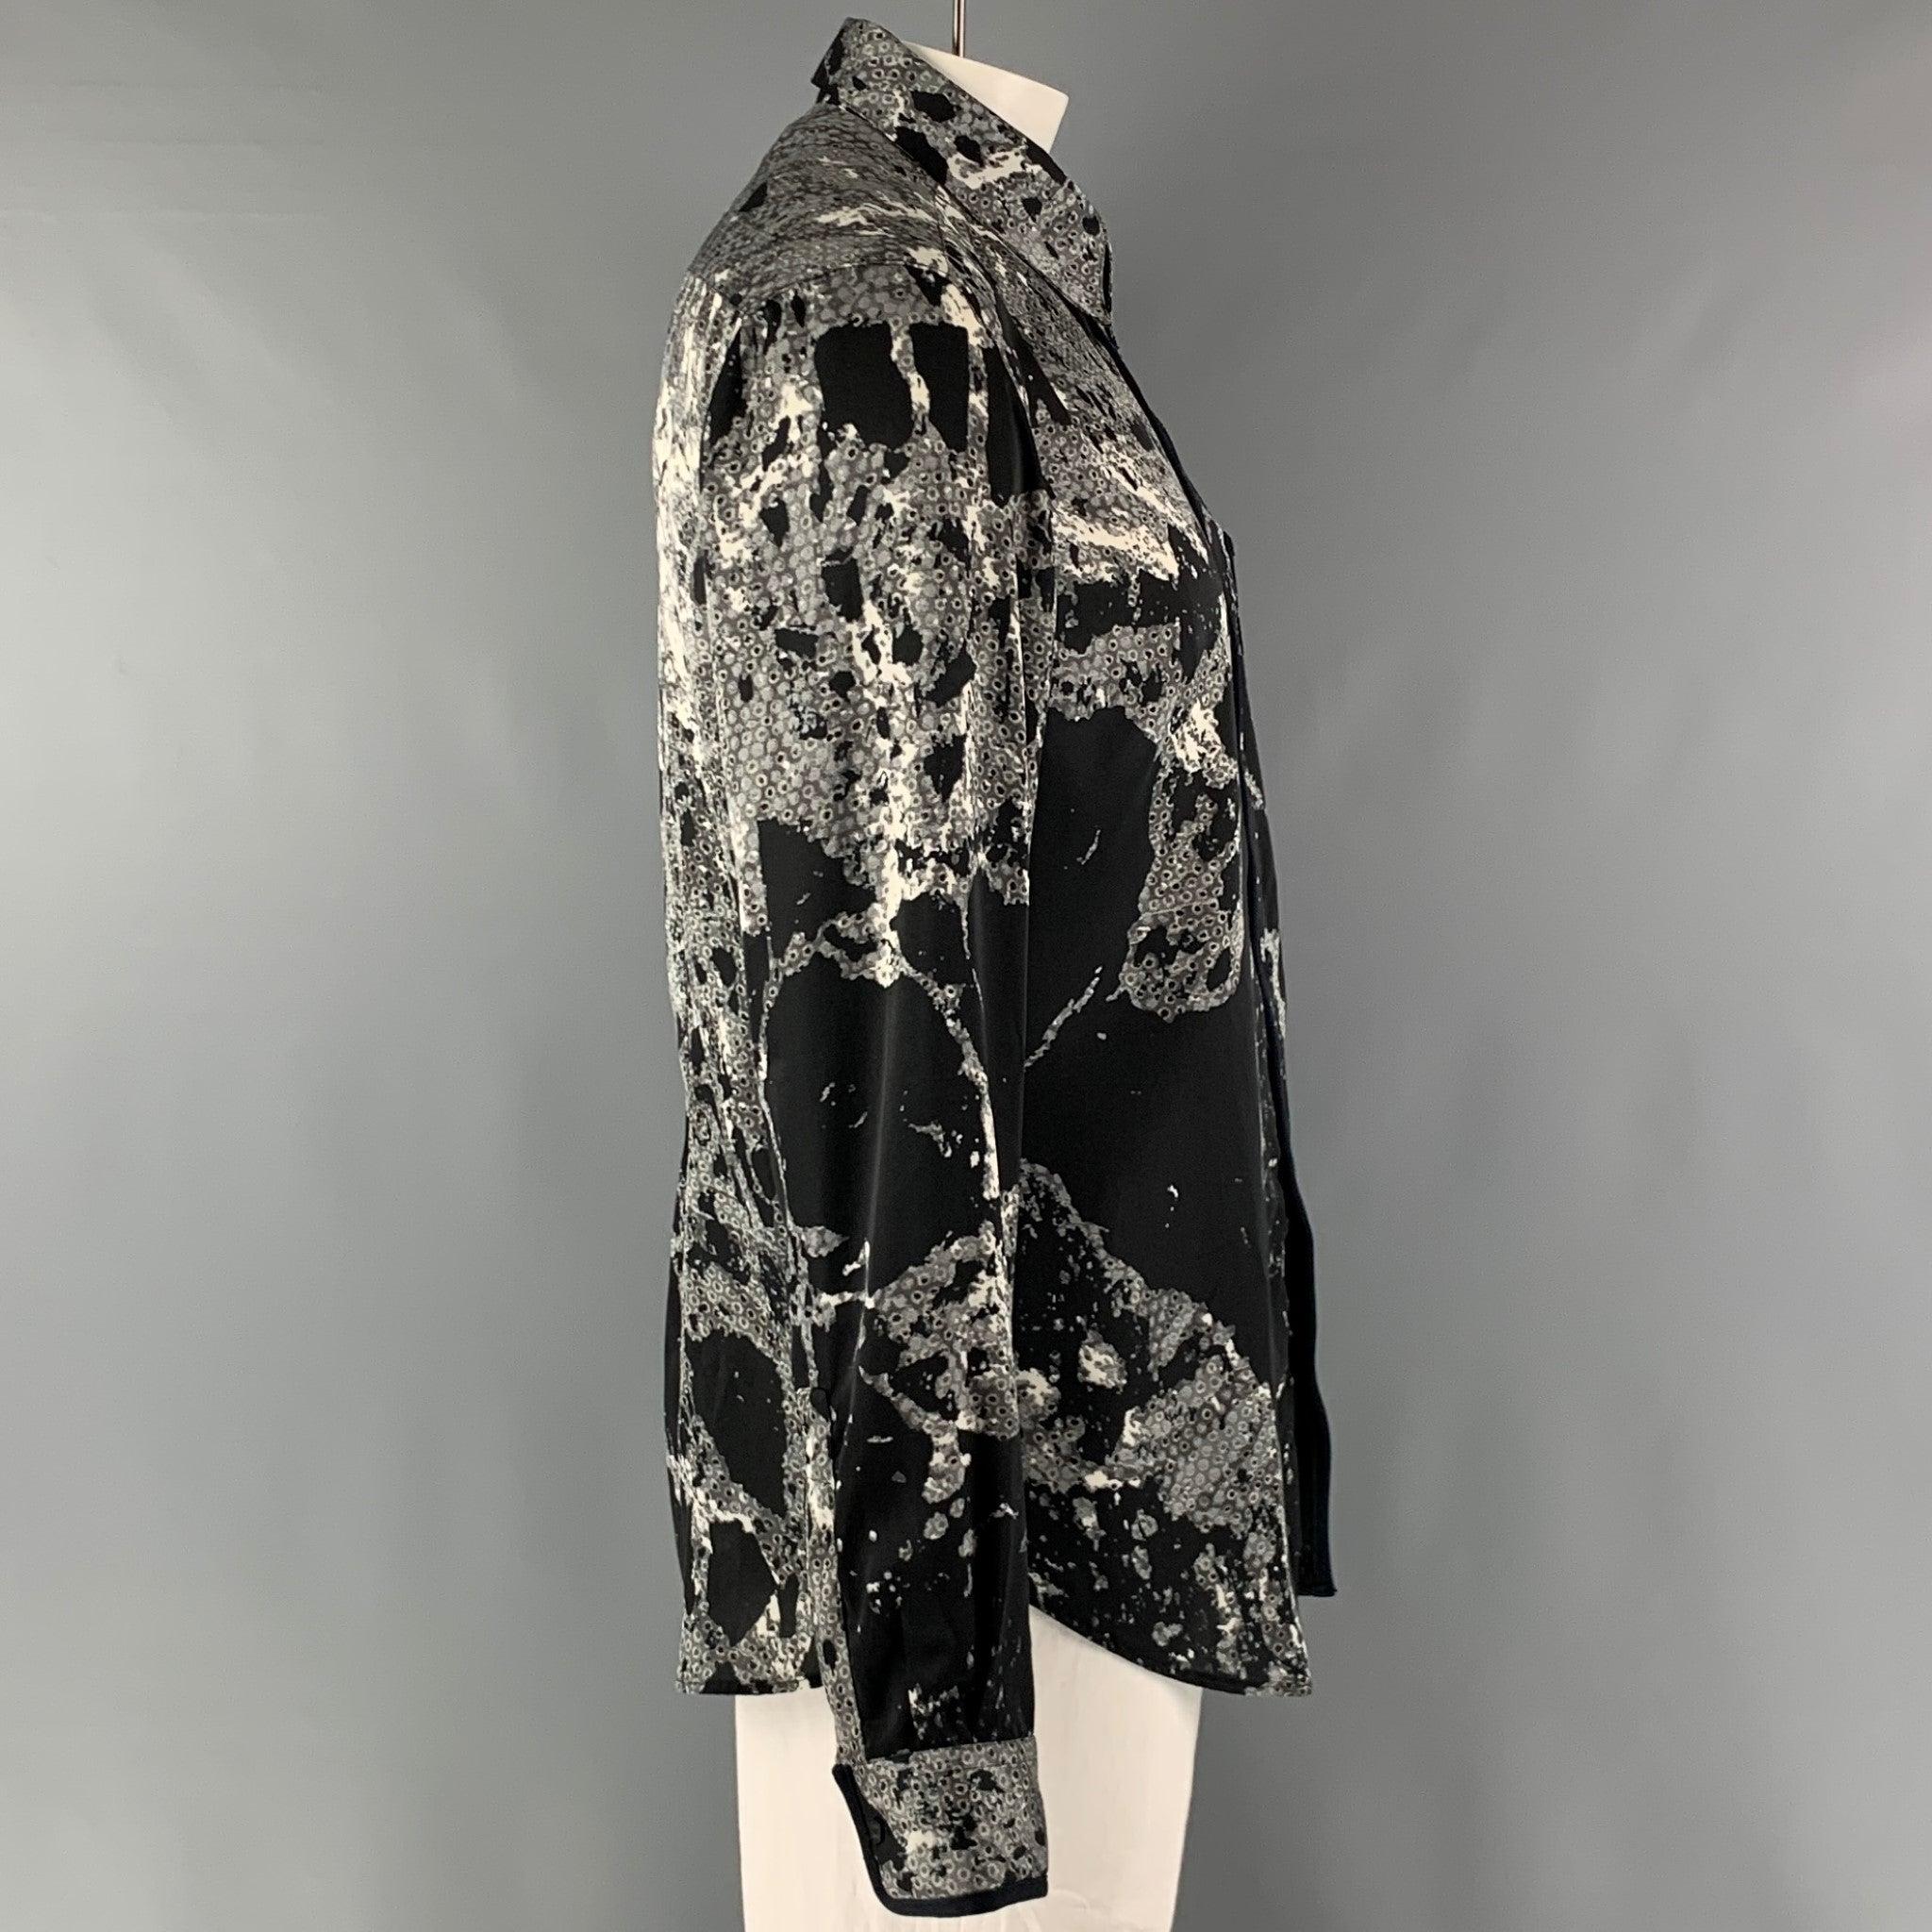 JUST CAVALLI long sleeve shirt comes in black and white abstract print polyester woven material featuring a button up style, front pocket, and a straight collar. Made in Italy.Excellent Pre-Owned Condition. 

Marked:   56 

Measurements: 
